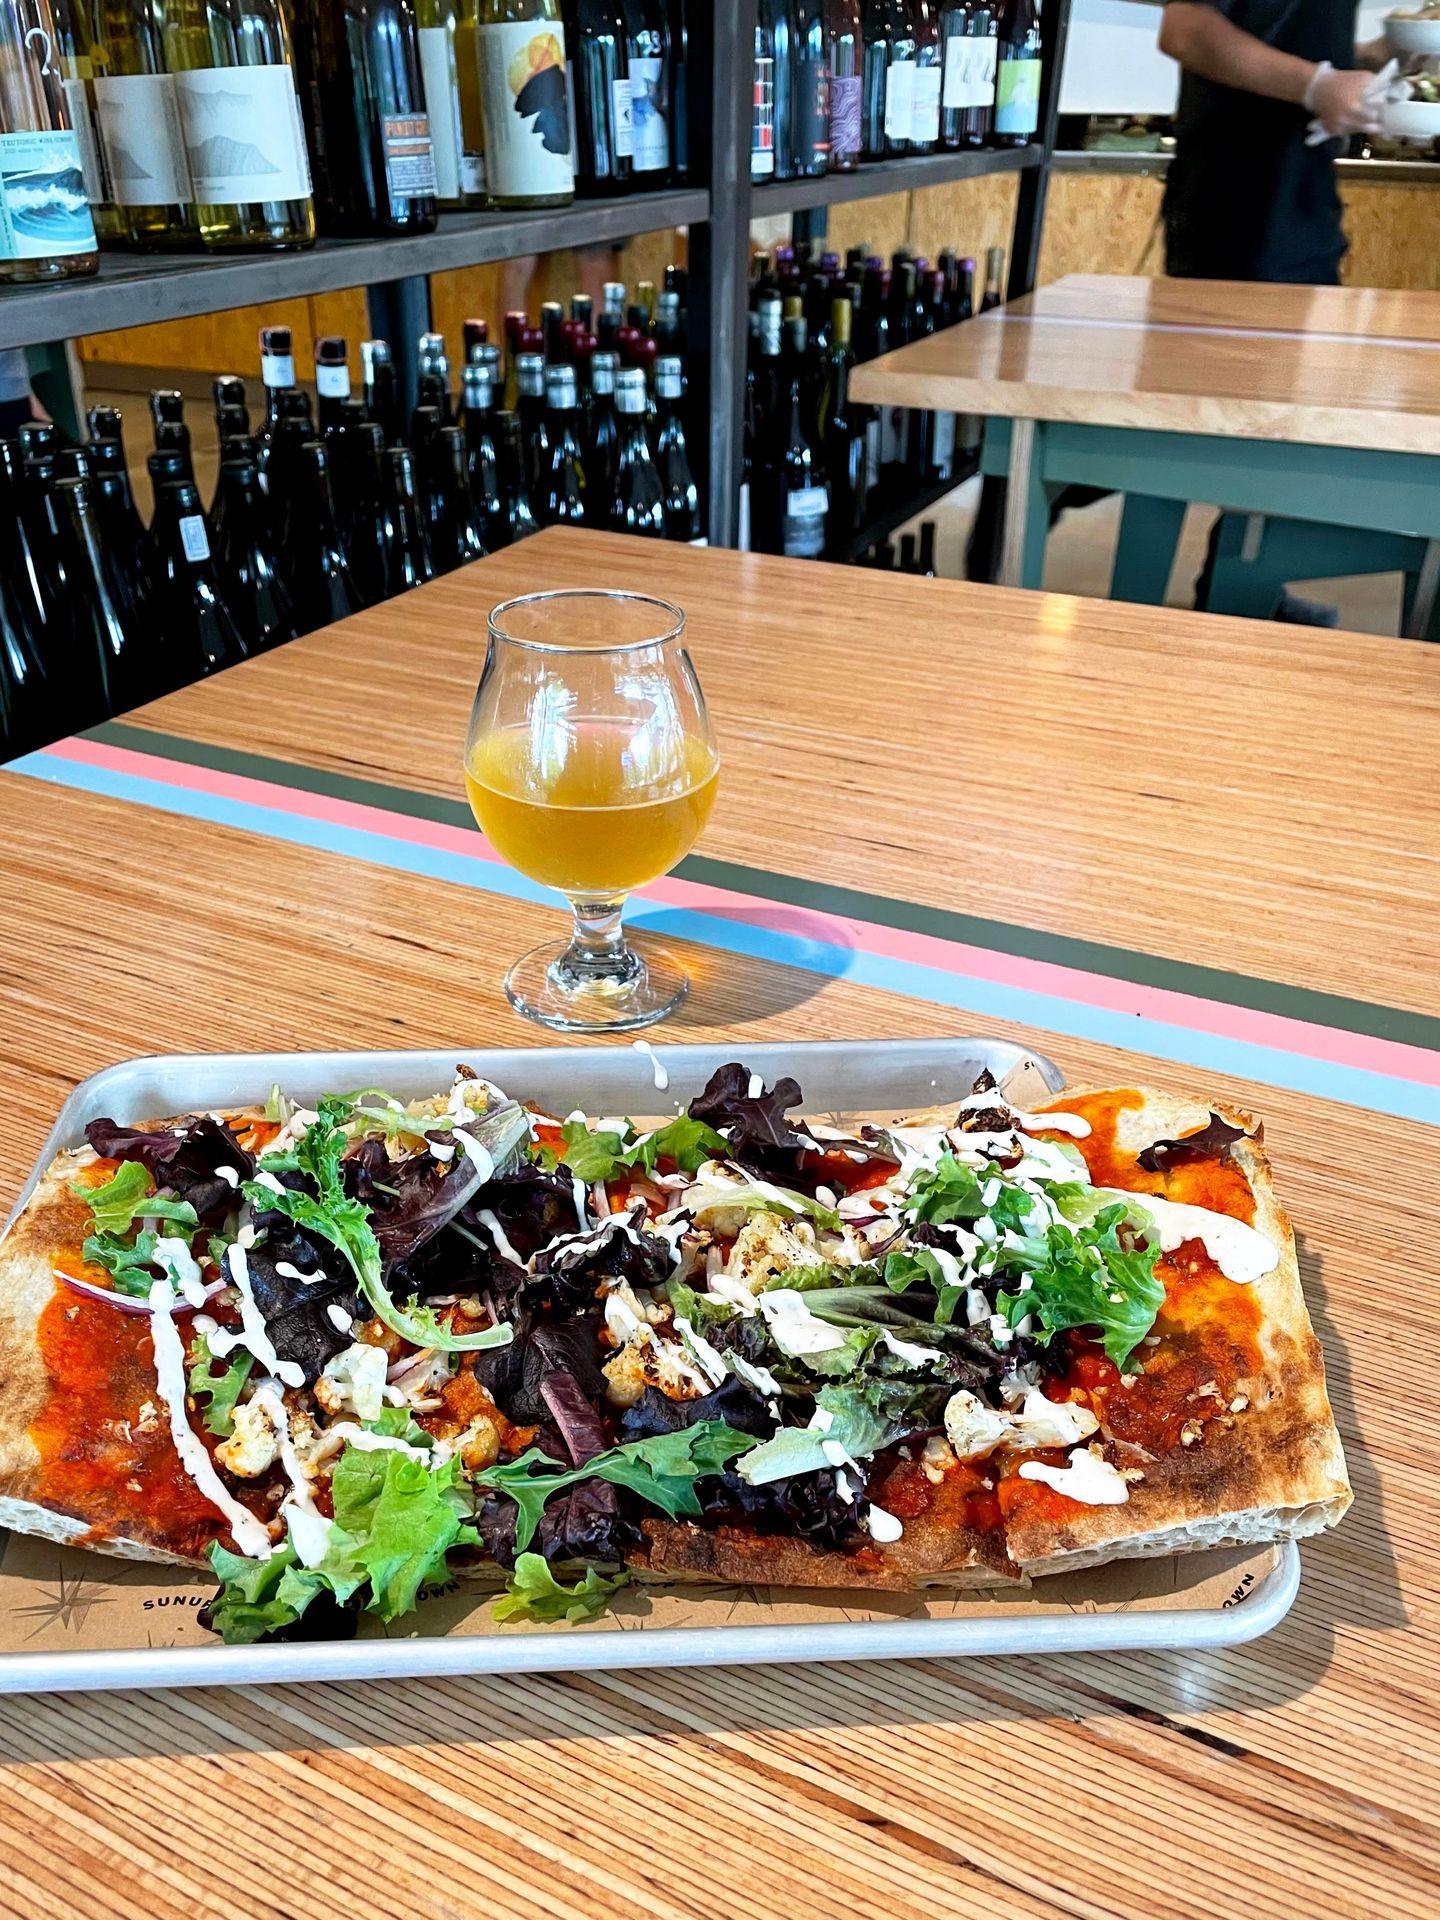 A flat bread pizza topped with lettuce and cheese. A glass of beer sits on the table next to it. The table is light wood with three stripes: one pink, one green, one blue.